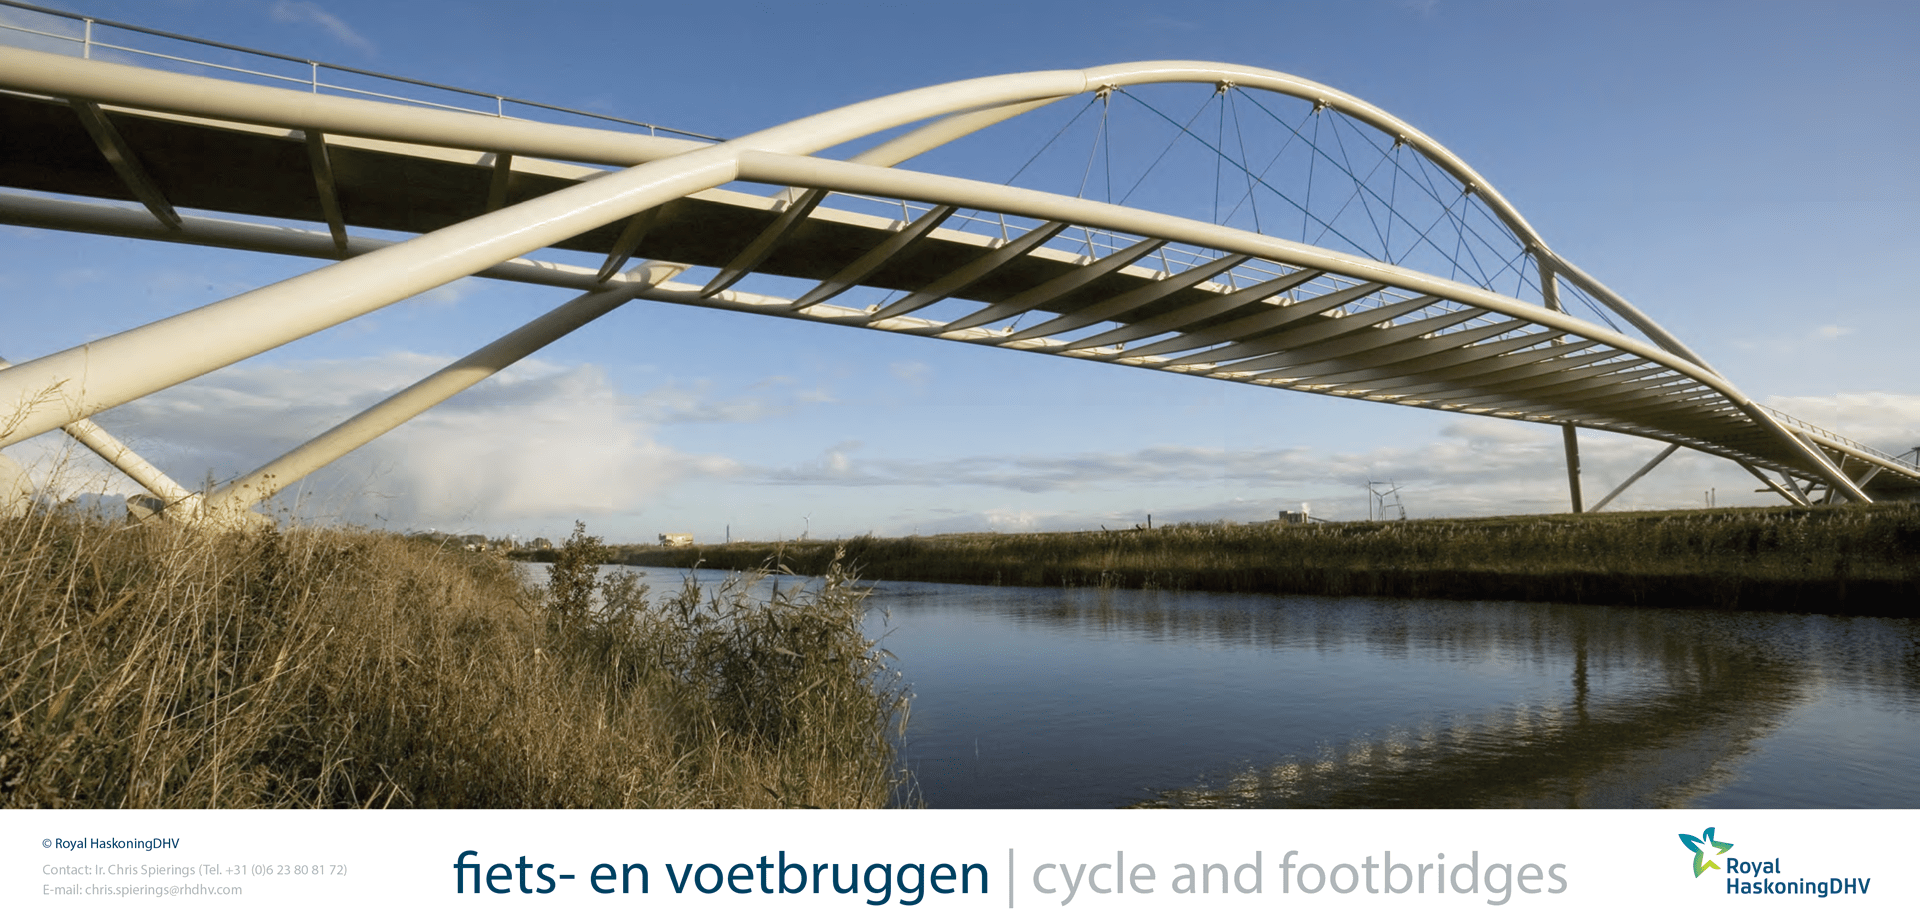 Architecture cycle and footbridges